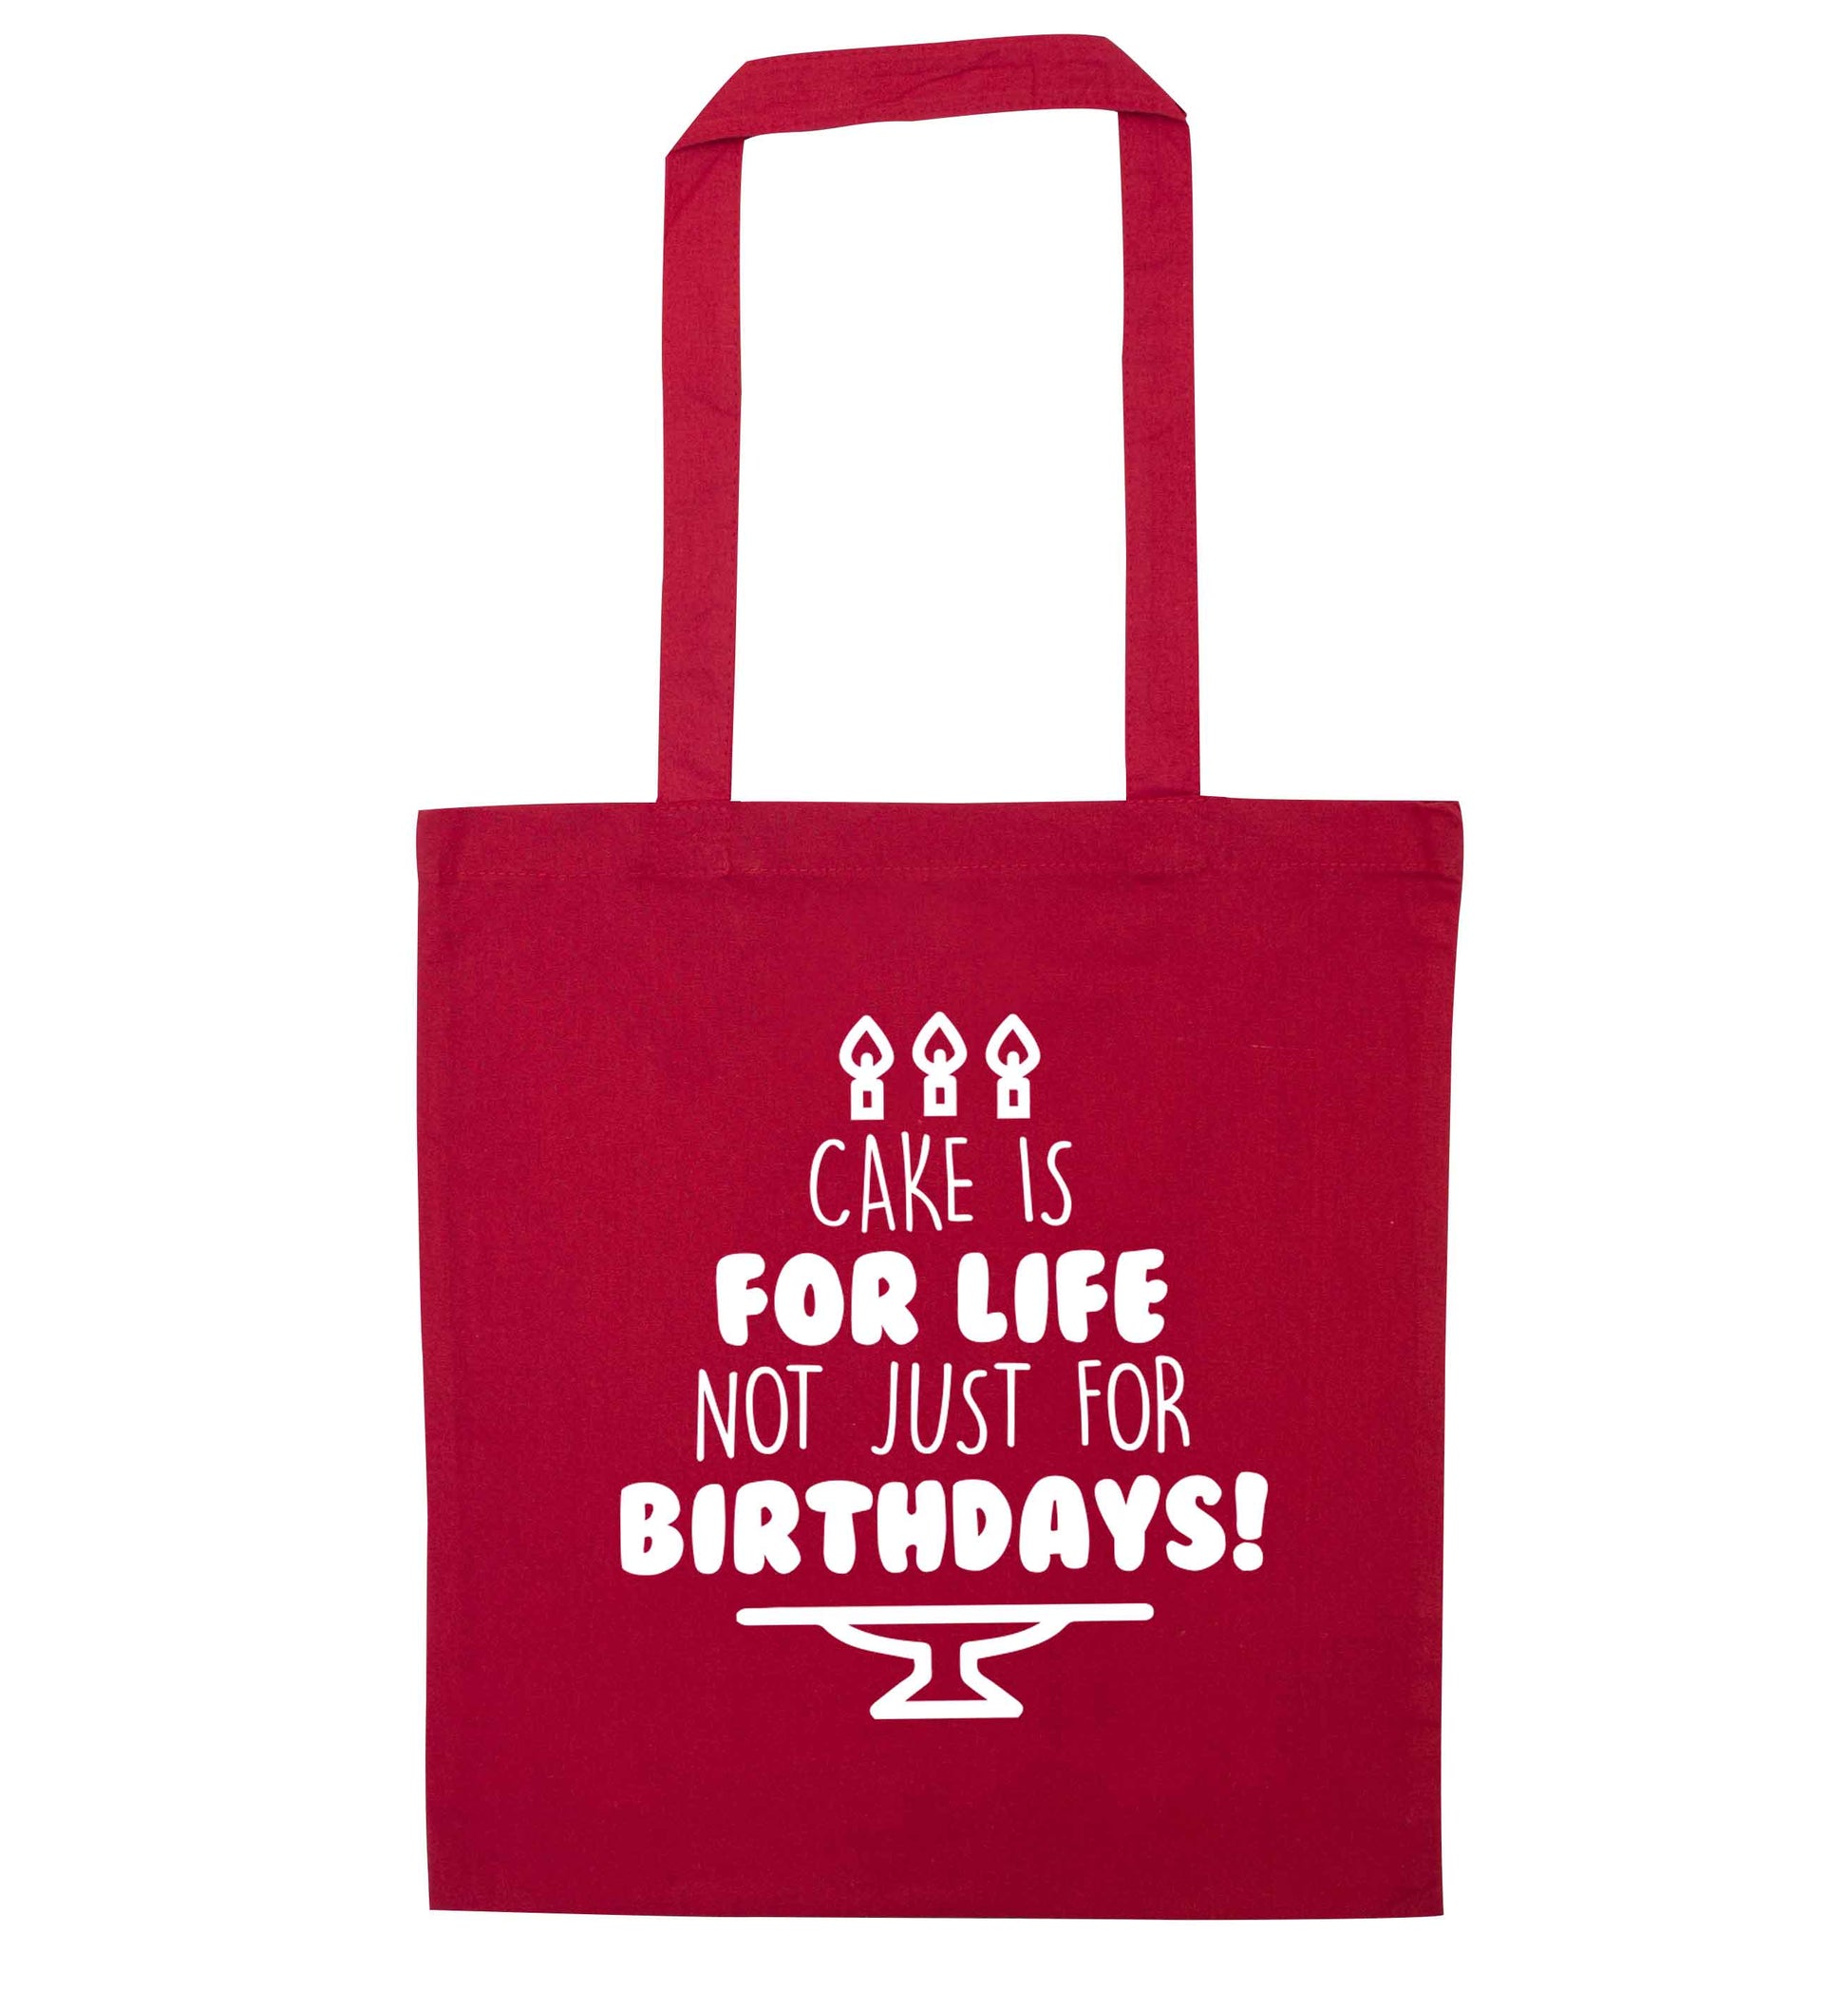 Cake is for life not just for birthdays red tote bag